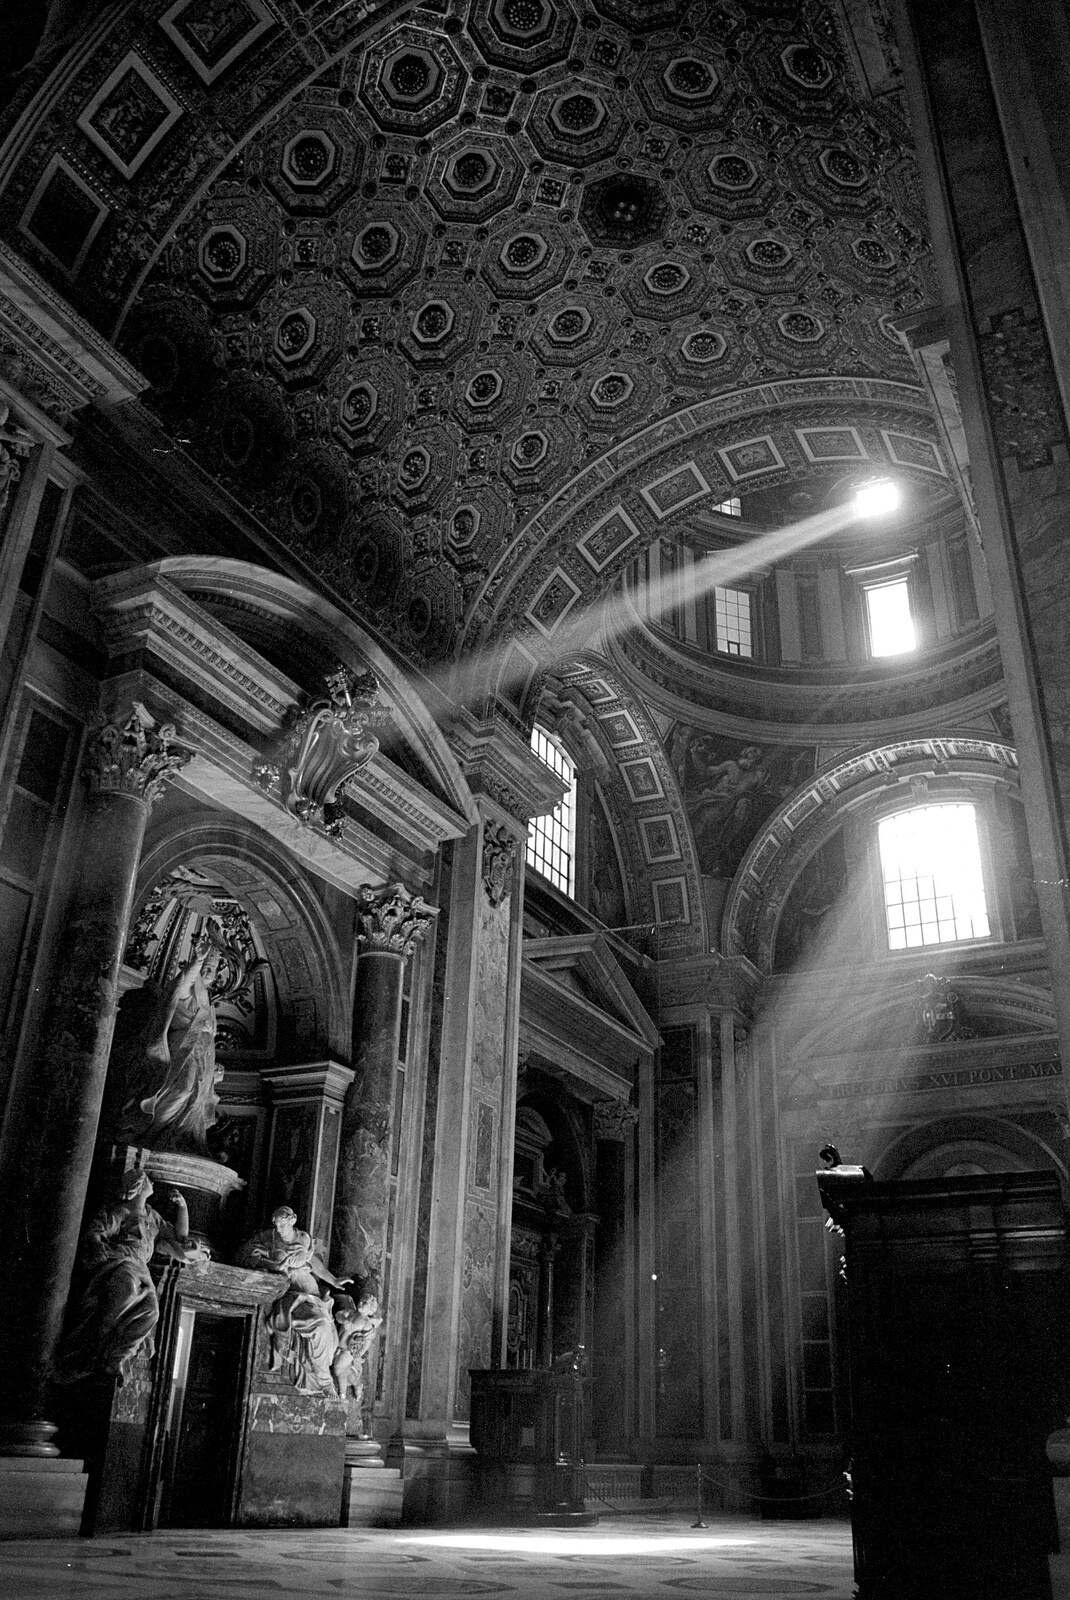 Shafts of light in St. Peter's from A Working Trip to Rome, Italy - 10th September 1999